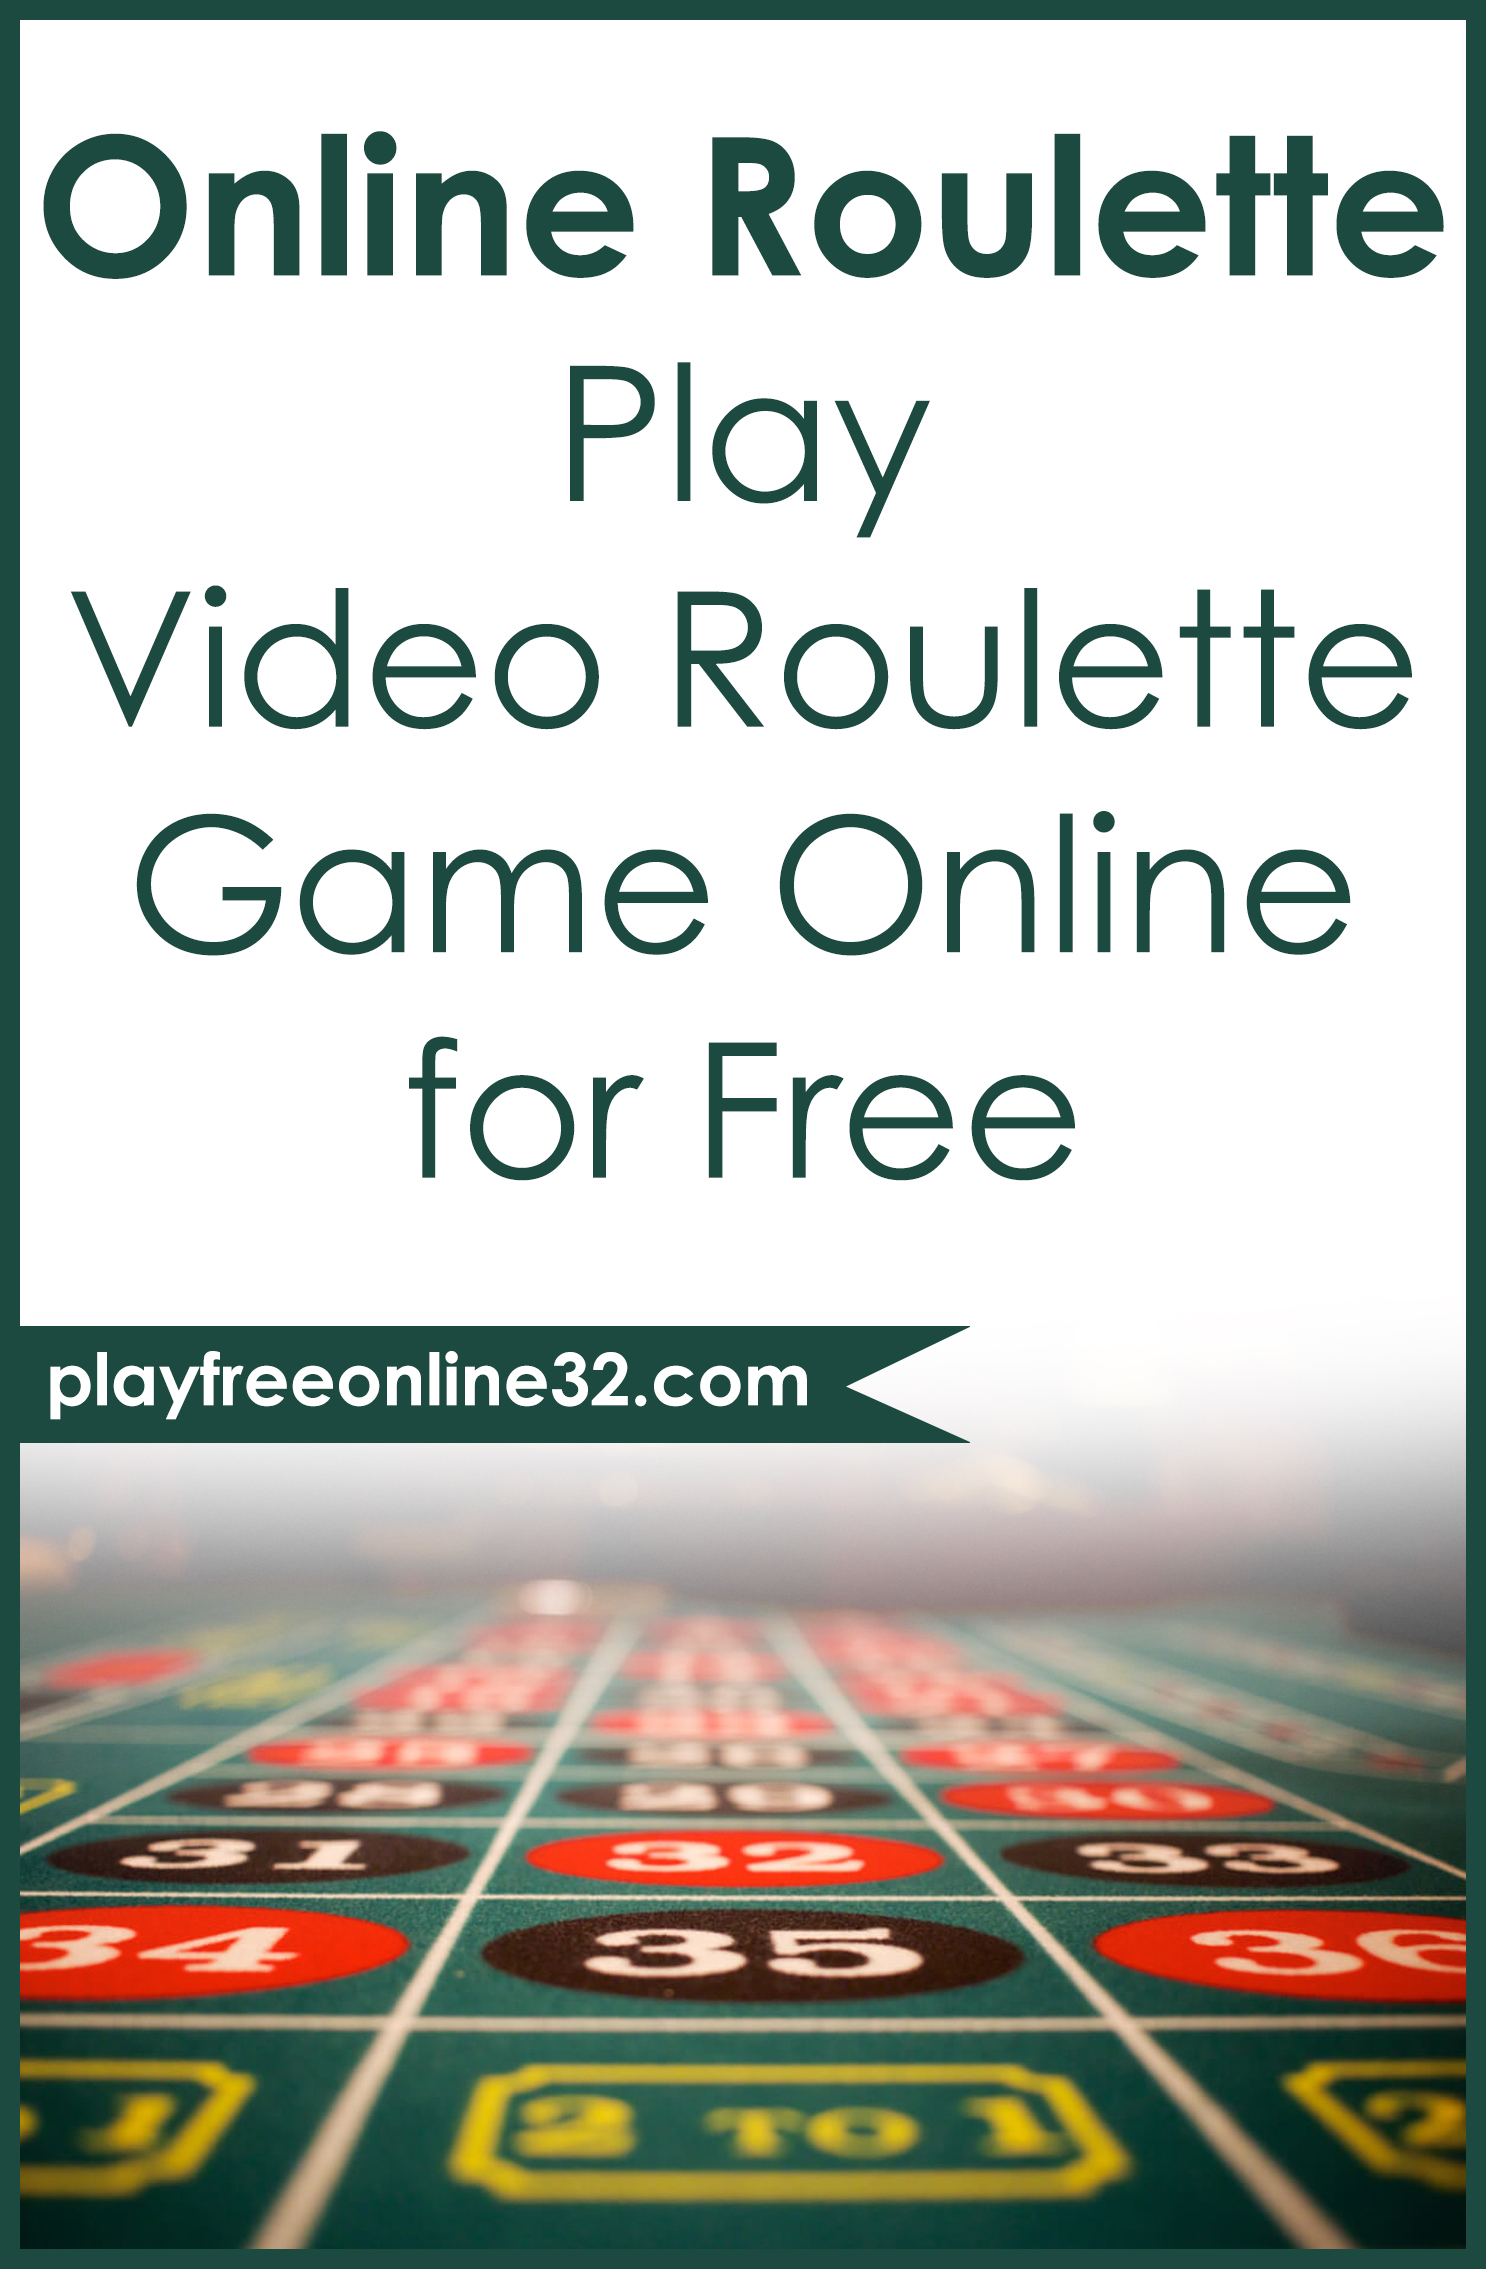 Online Roulette • Play Video Roulette Game Online for Free Pinterest